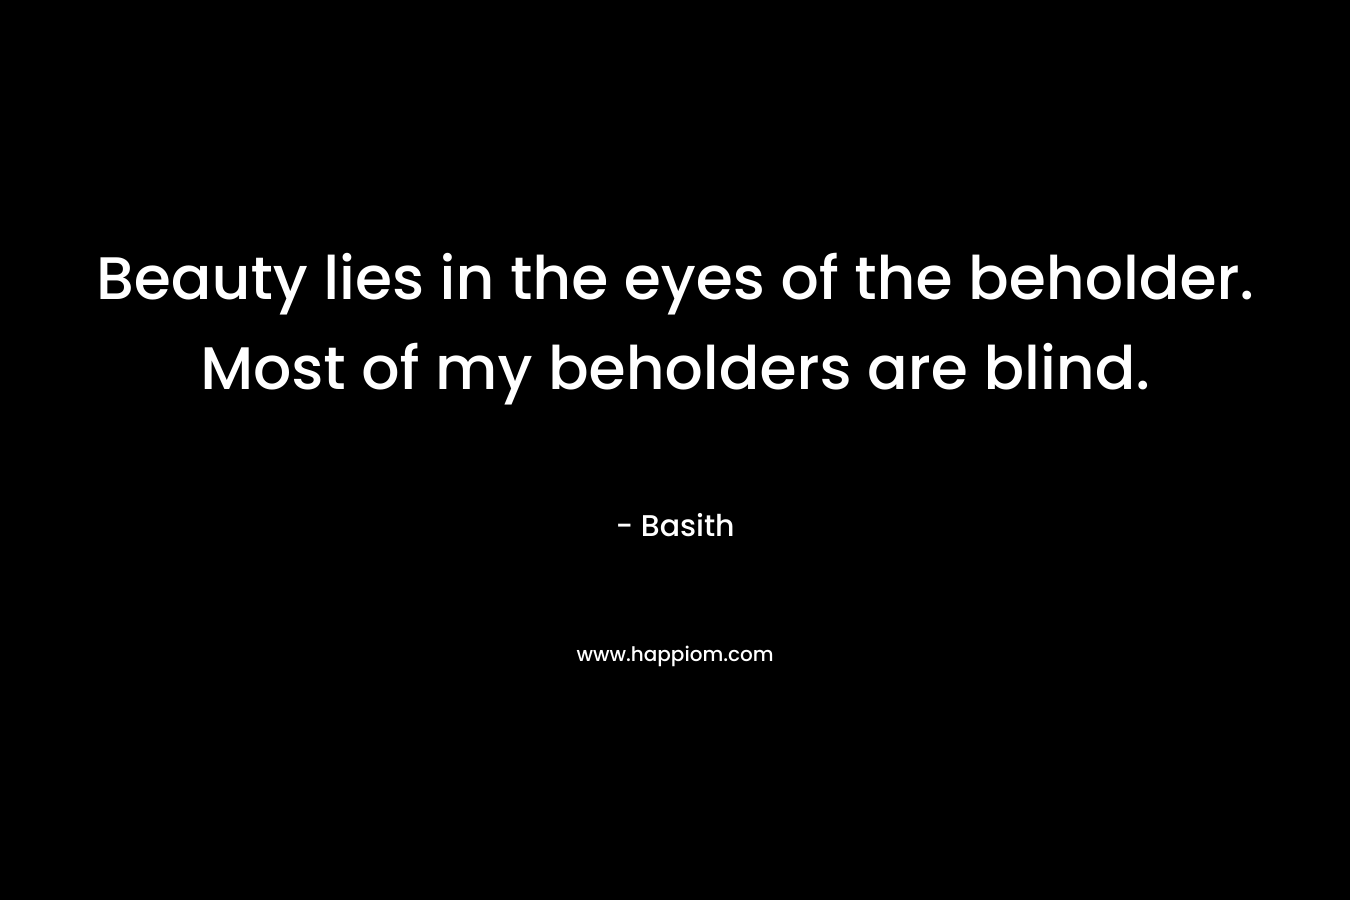 Beauty lies in the eyes of the beholder. Most of my beholders are blind.